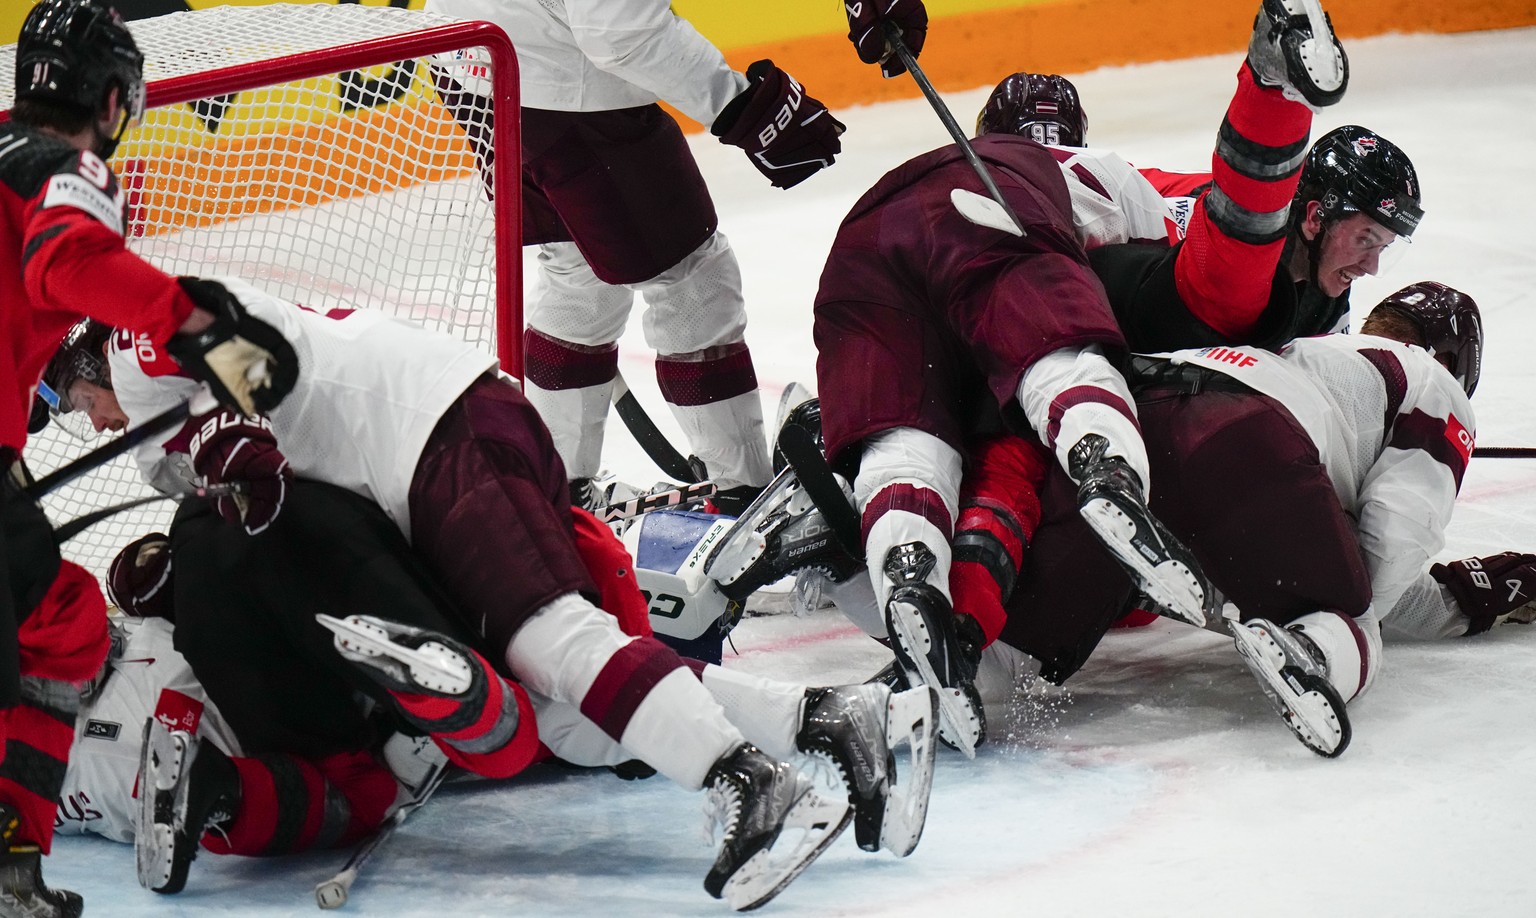 Canada and Latvia (white) battle at the net during their semifinal match at the Ice Hockey World Championship in Tampere, Finland, Saturday, May 27, 2023. (AP Photo/Pavel Golovkin)